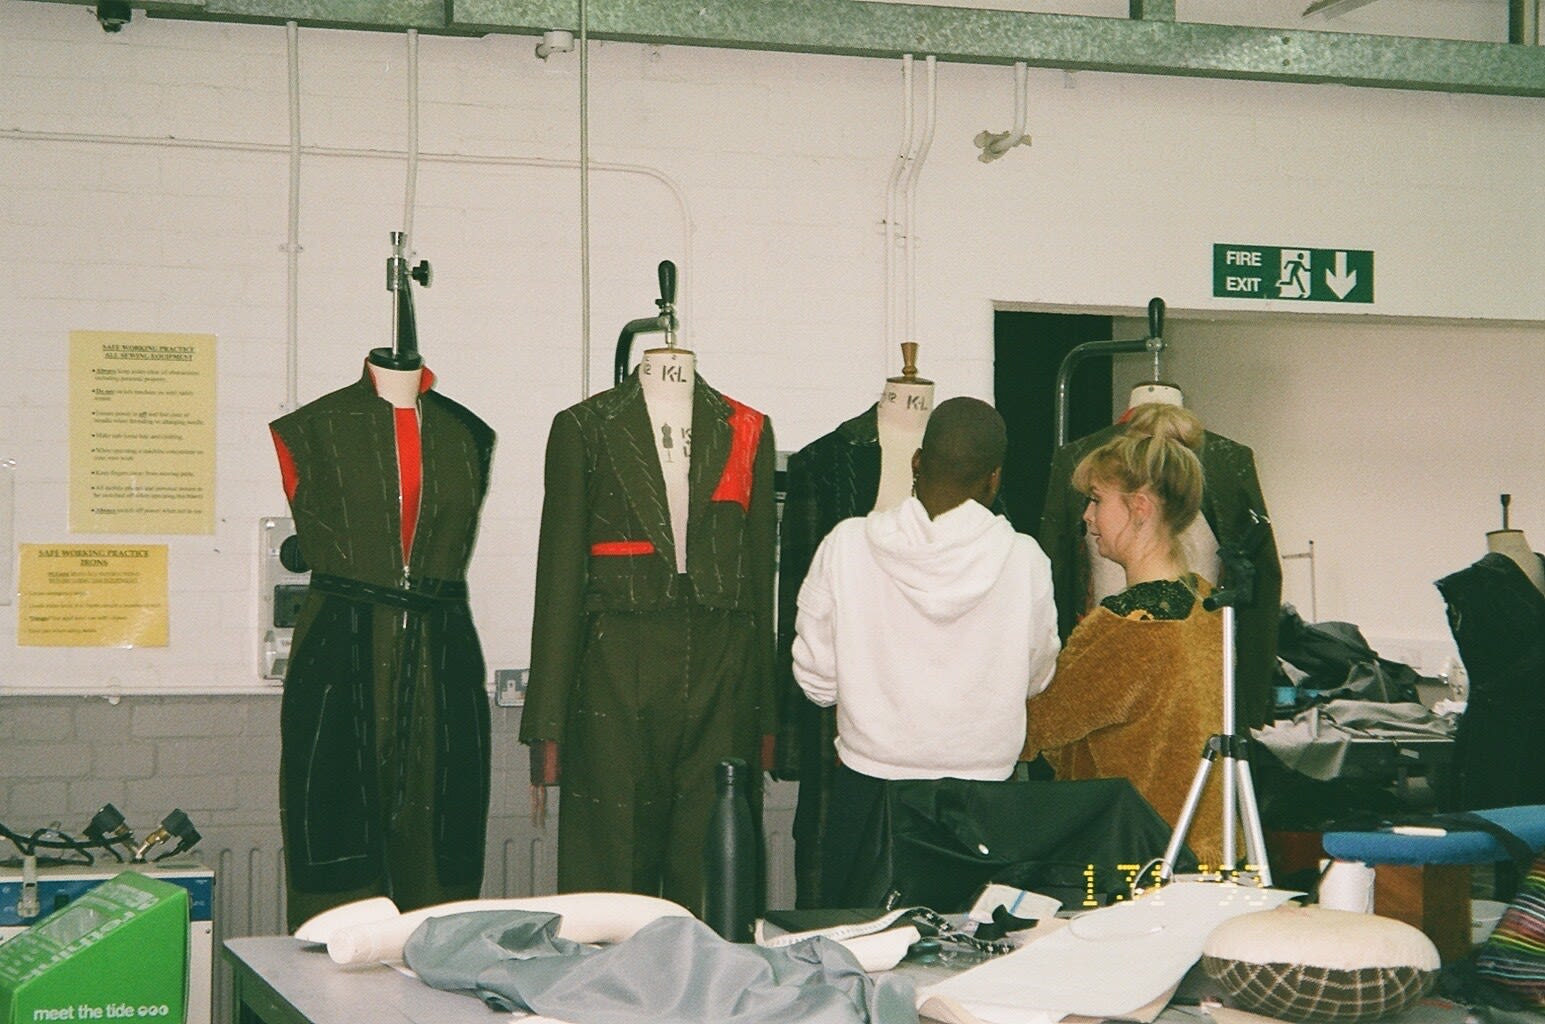 Mannequins with tailoring on